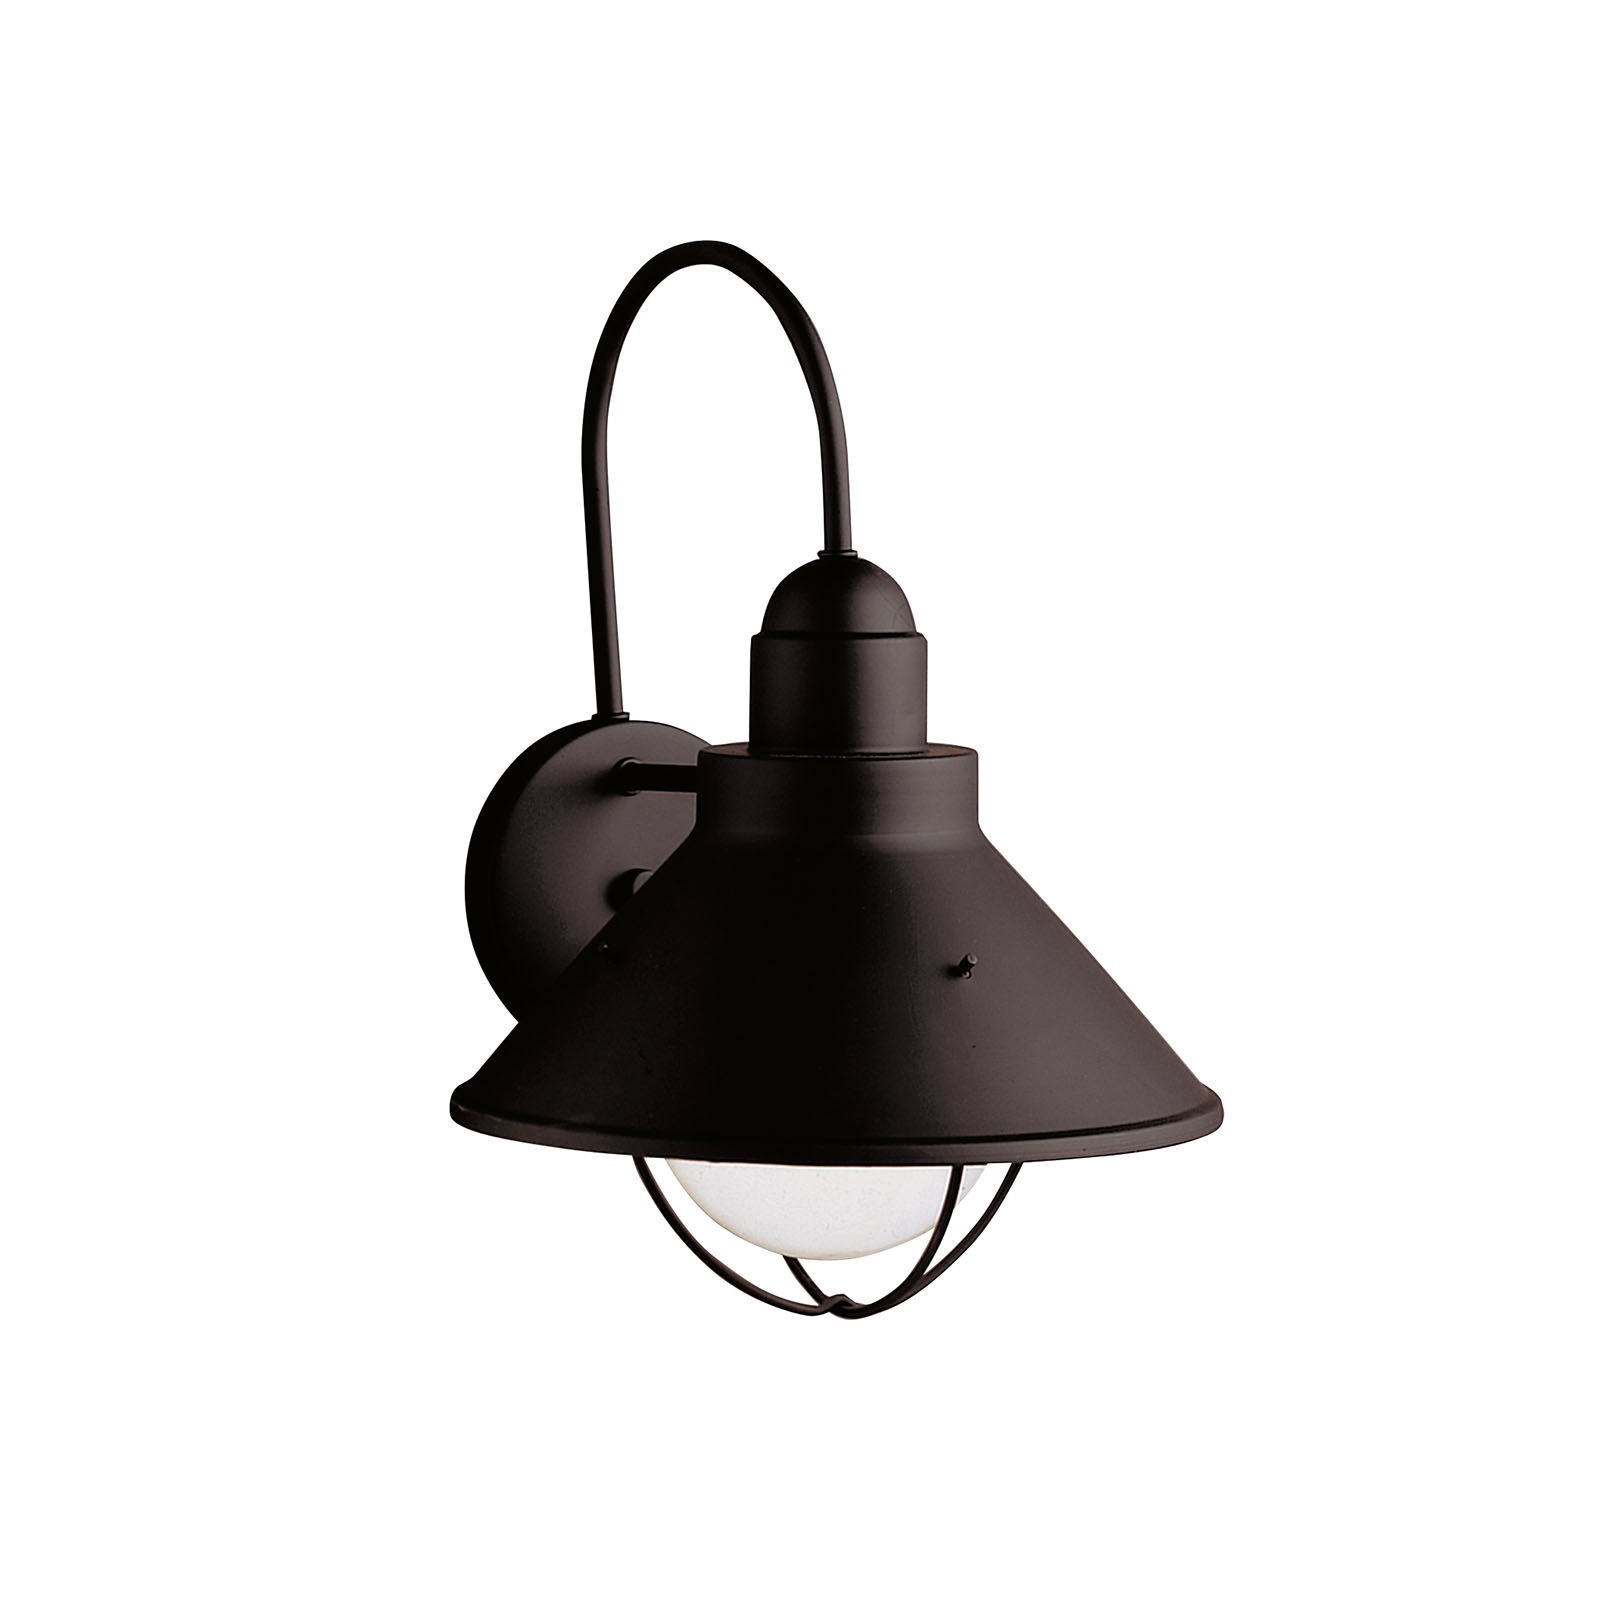 With an aura that is as pure as a sea breeze, the Seaside(TM)Collection offers the homeowner a unique line of outdoor fixtures guaranteed to bring a new identity to your home's landscape. For this 1-light Seaside(TM)Wall Lantern, aluminum with stainless steel is combined with Kichler's Black finish, resulting in a high quality fit that will look fantastic for years to come. The fixture houses a 150-watt (max.) bulb that provides outstanding outdoor illumination for your landscape. It is 14.5in. high, is U.L. listed for wet location and is Dark Skies compliant.